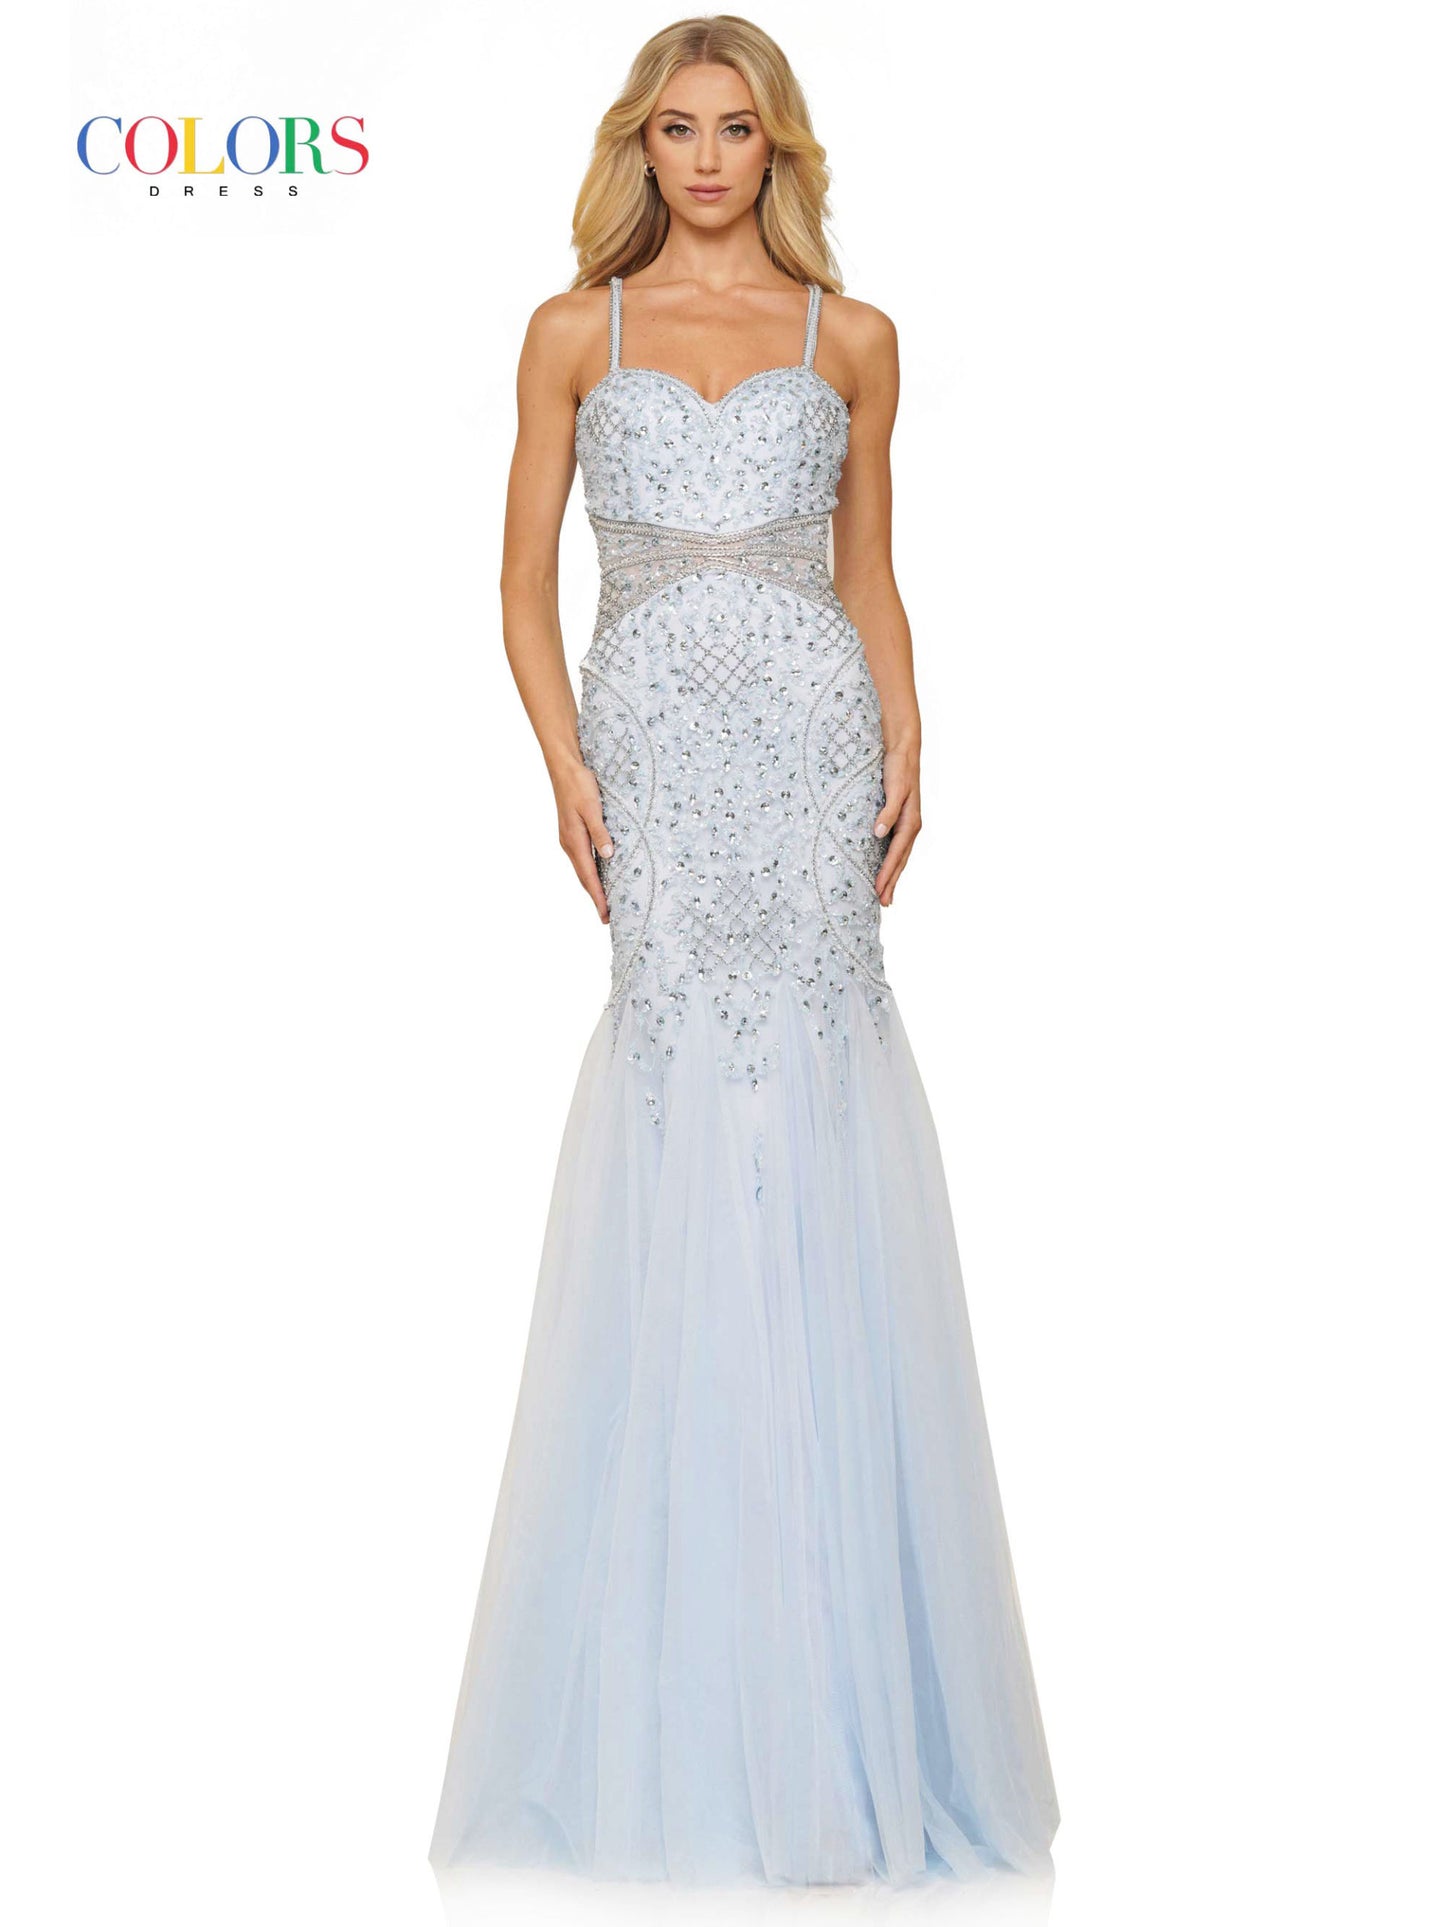 Colors Dress 2230 Light Blue Mermaid Prom or Evening dress with an all over delicately beaded bodice mermaid dress in sweet heart neckline, tulle godet, beaded strap